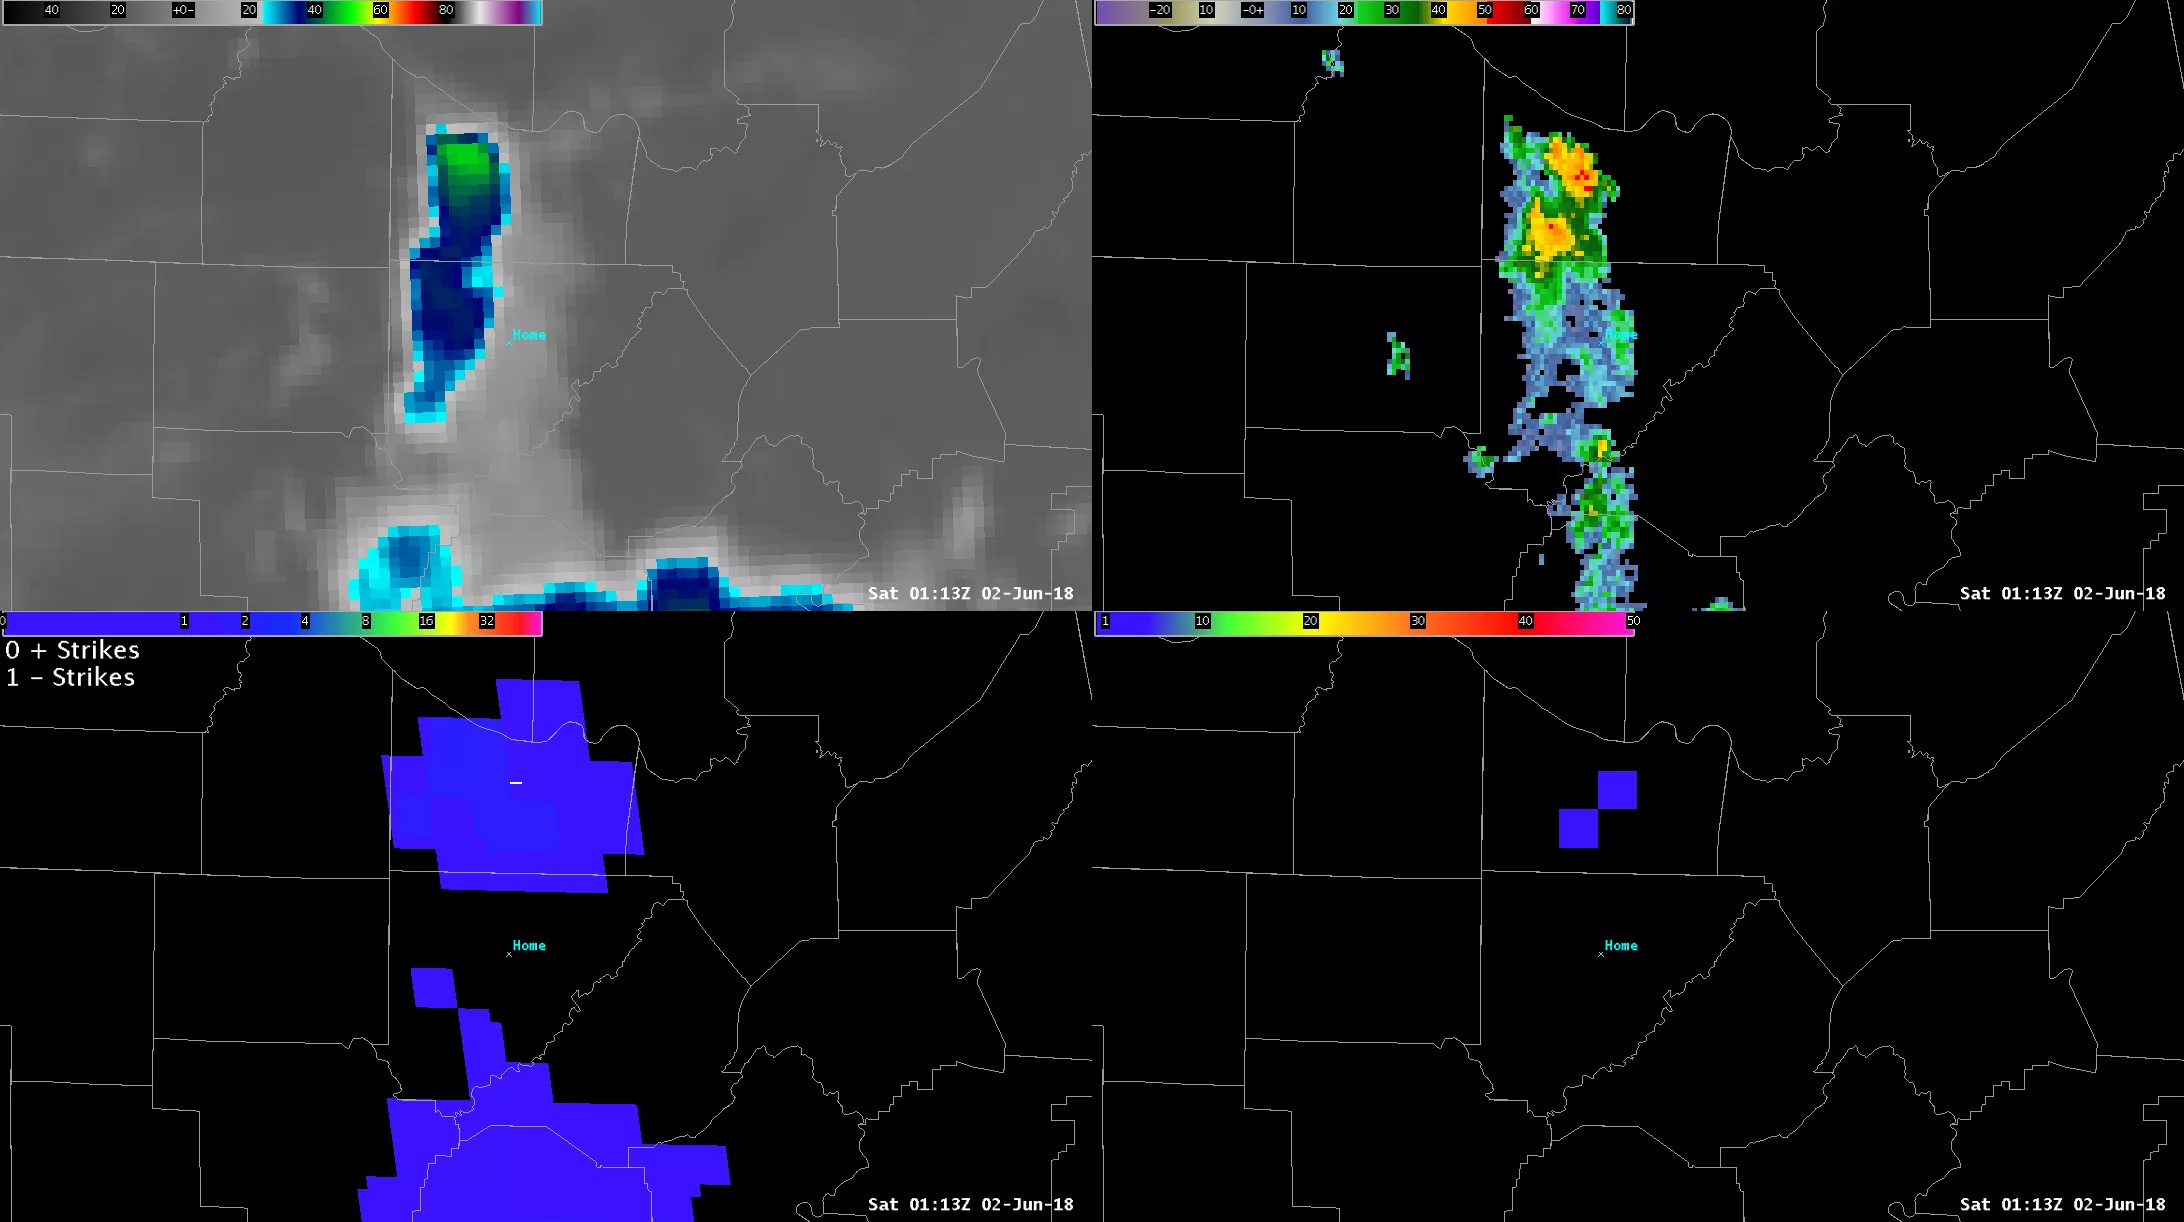 The bottom left panel of this image maps the location of lightning from the GLM Flash Extent Density product. The concert location is marked “Home” in light blue. 